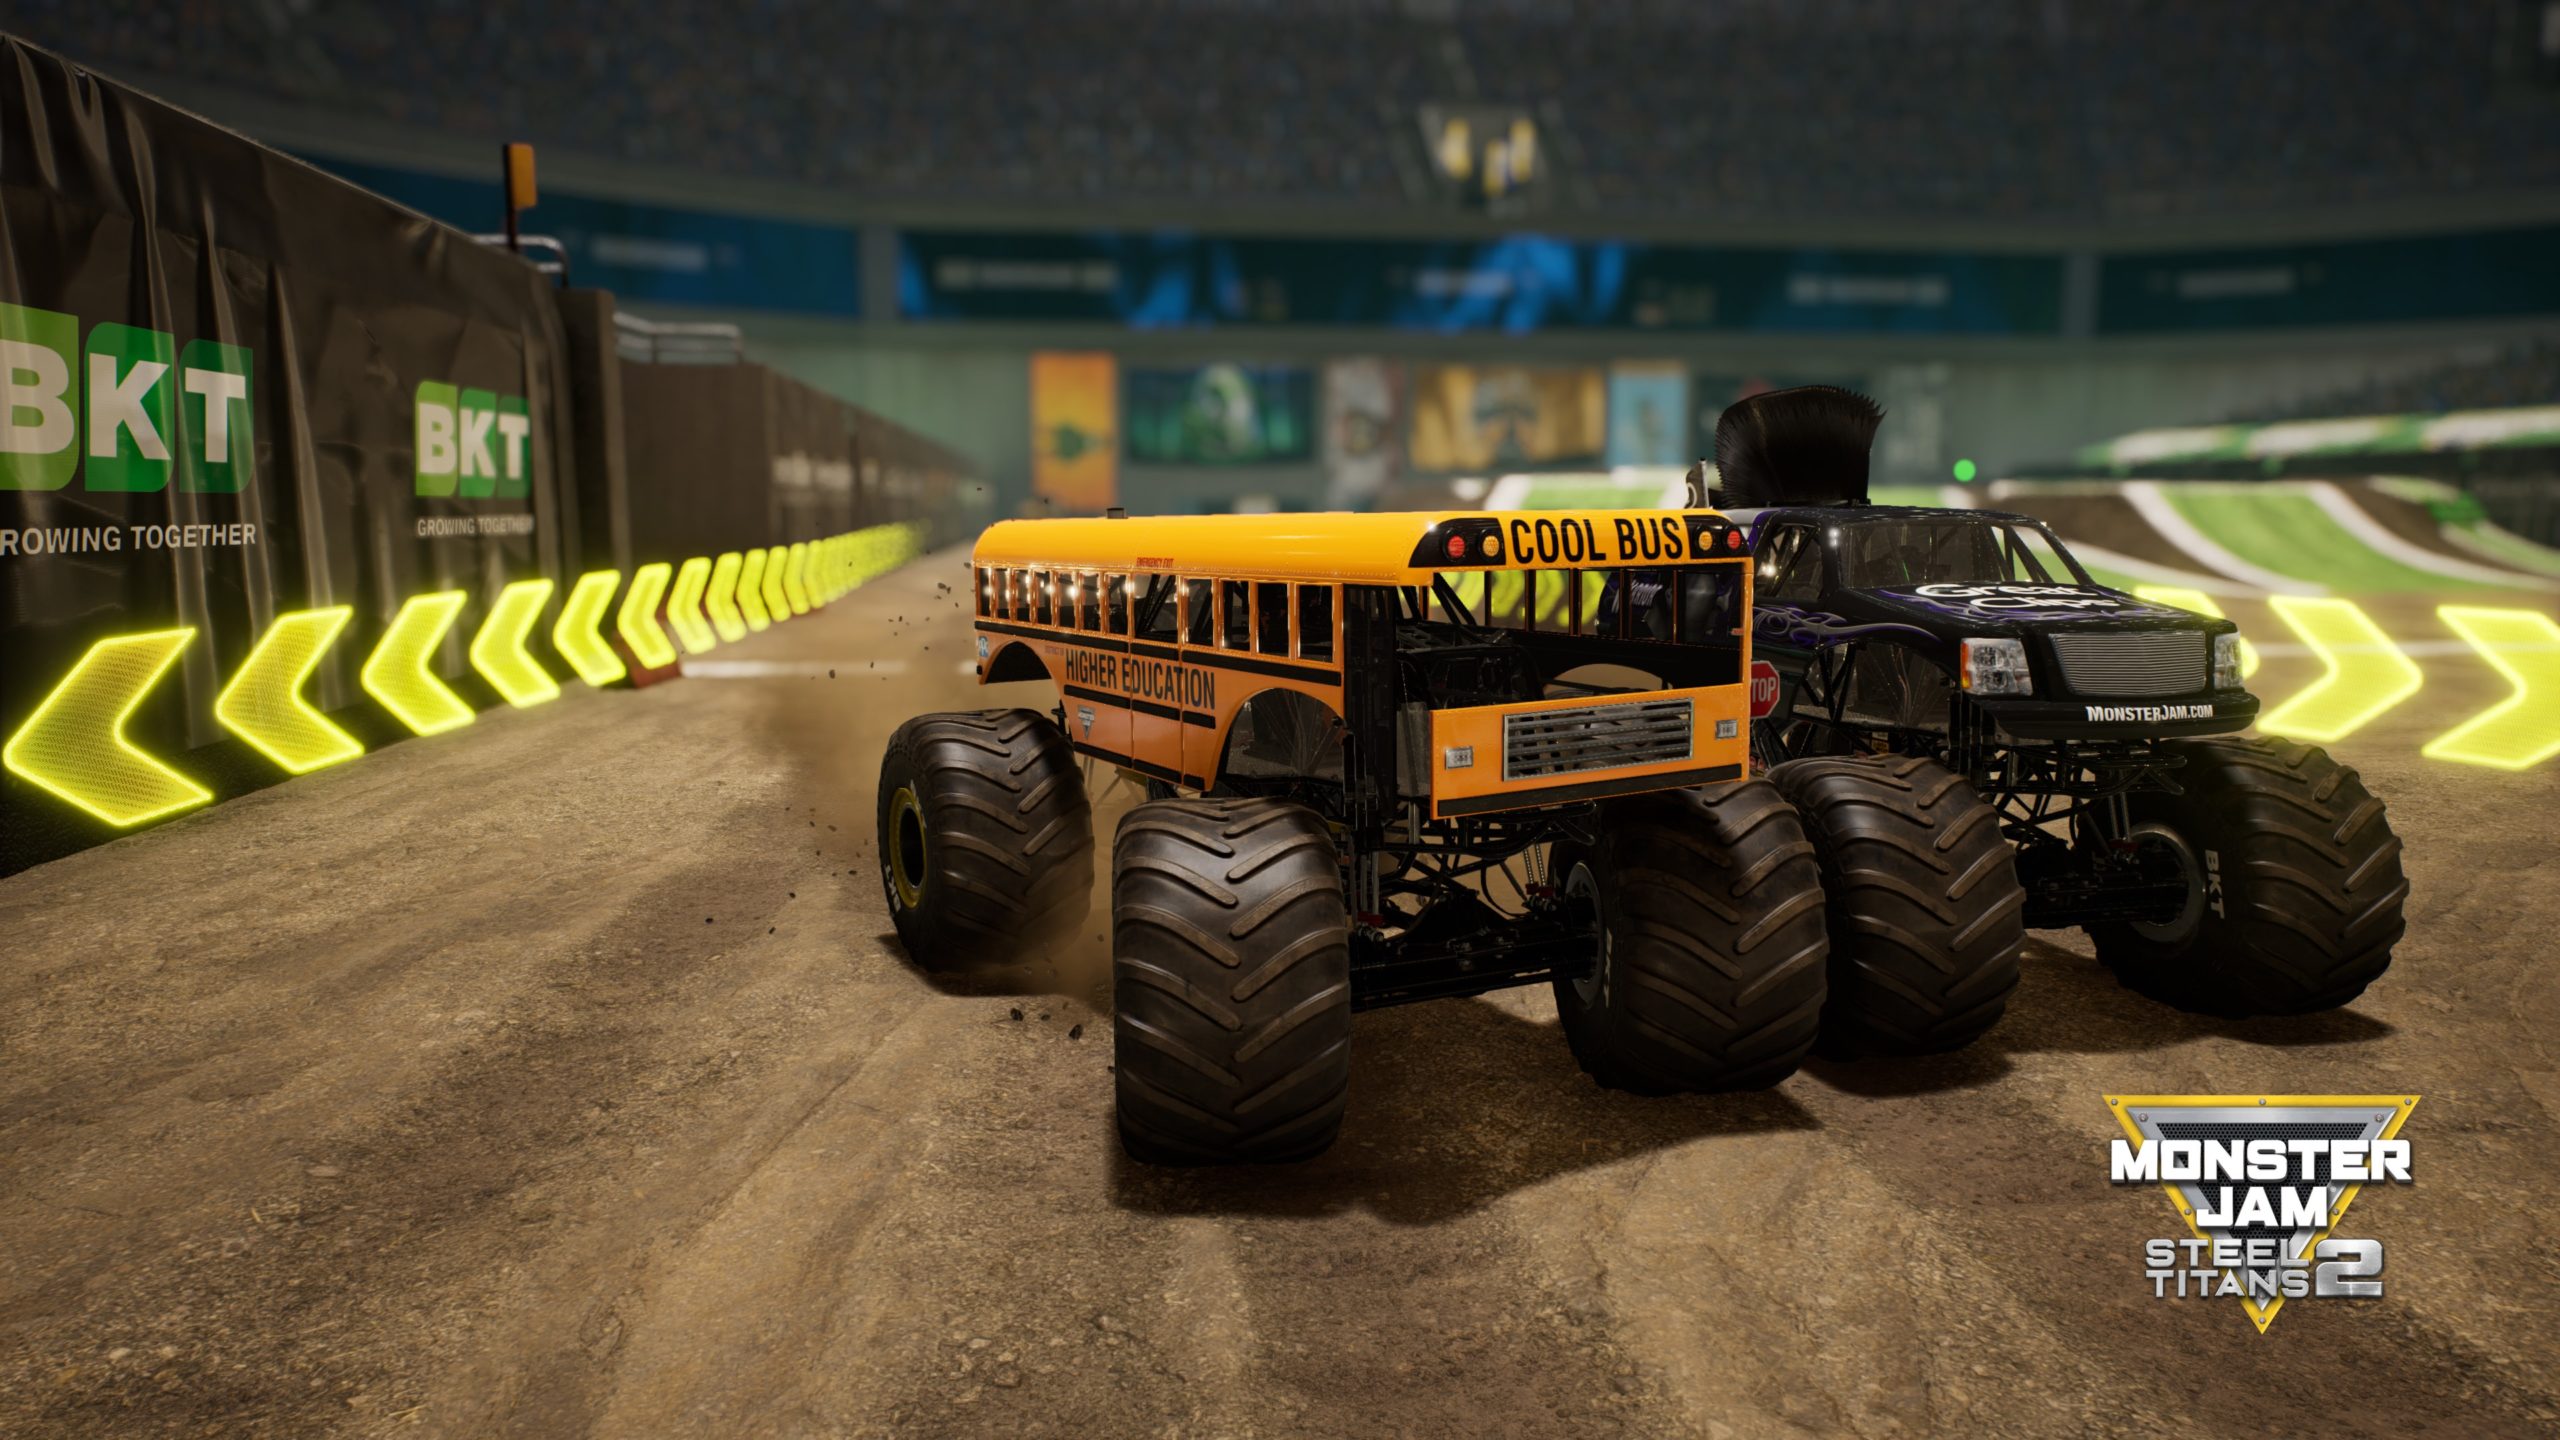 Monster-Jam-Steel-Titans-2-Course-Head-To-Head-2